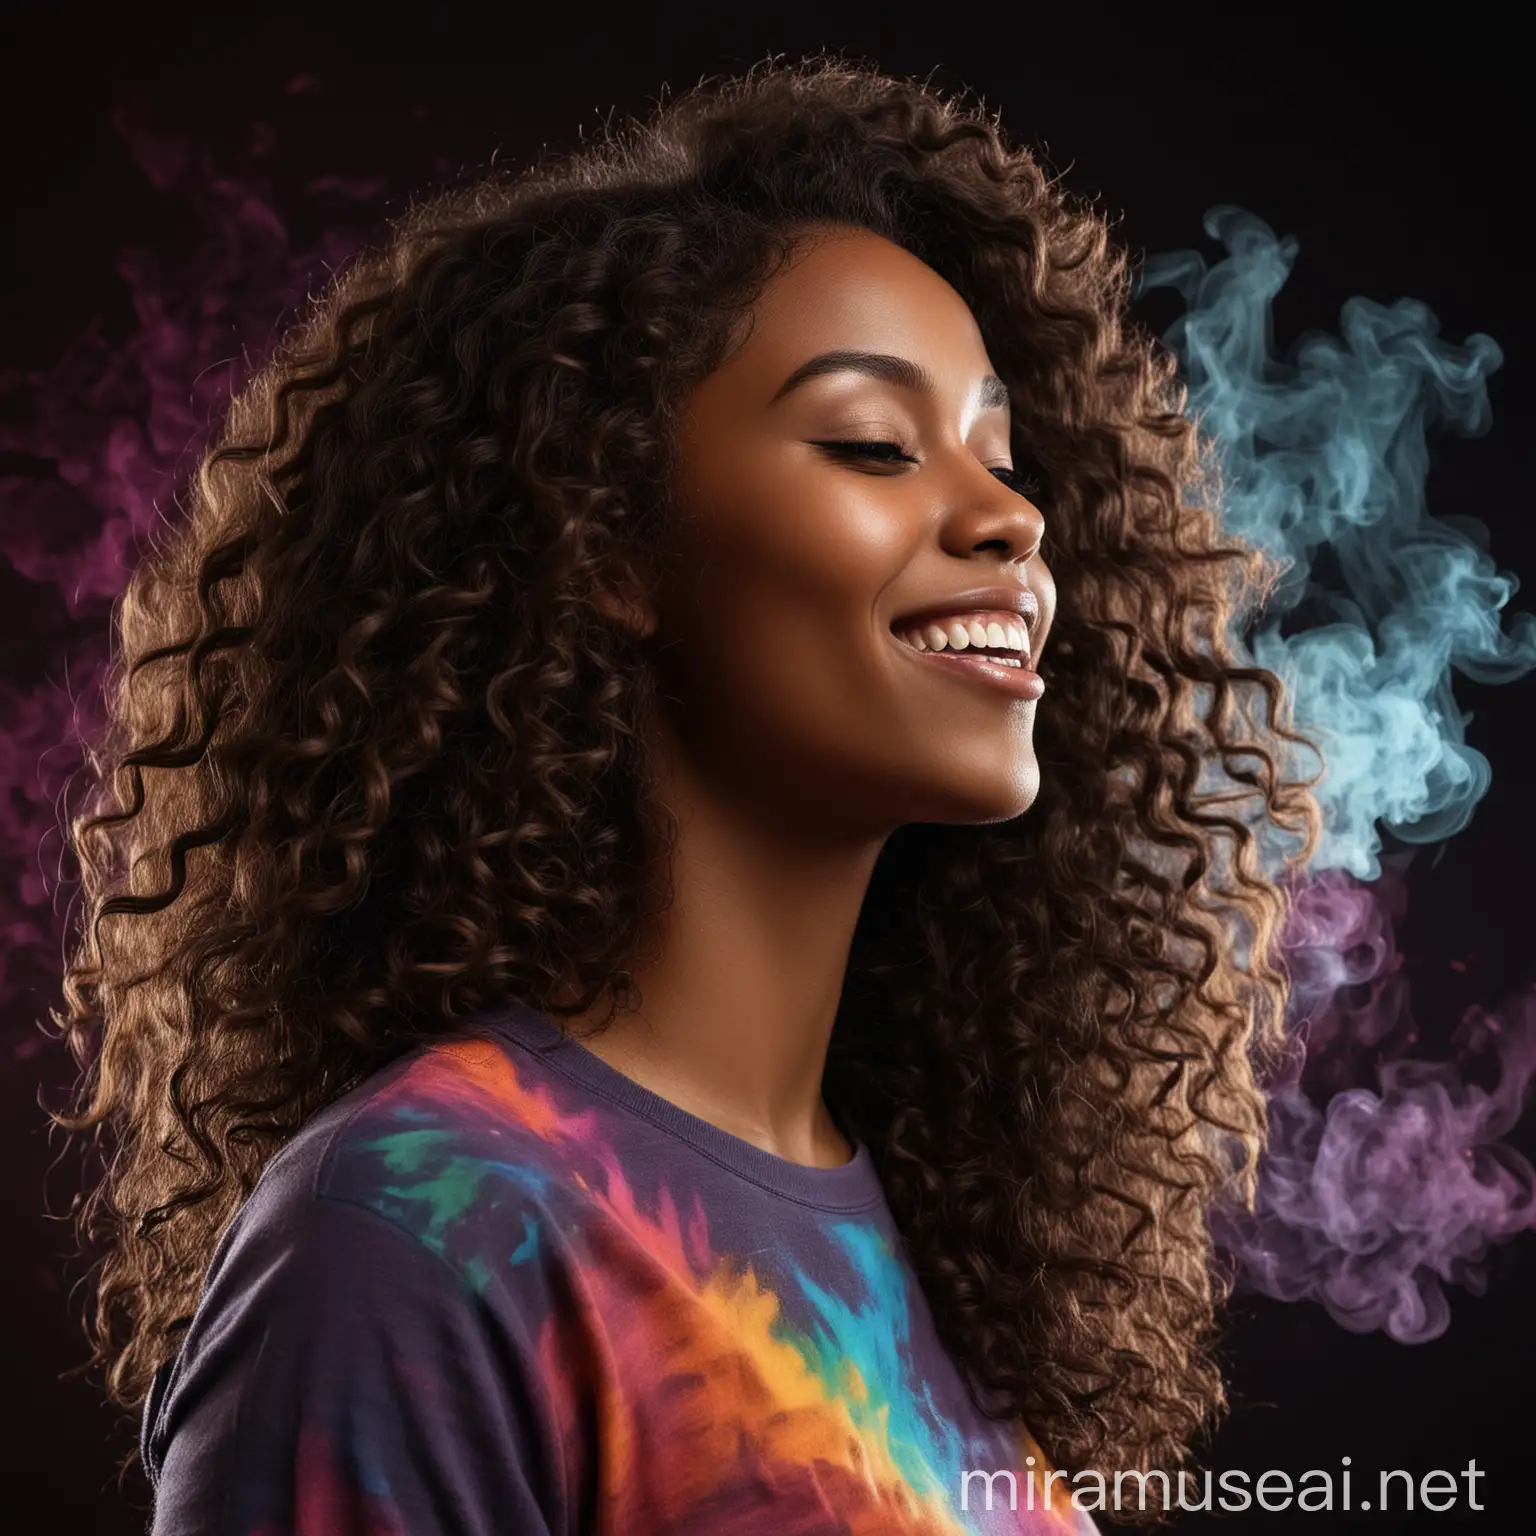 A close-up silhouette portrait from the side of a dark skinned woman with long curly hair. She is wearing a knit tshirt. She is smiling but has her mouth closed. The background is black and there is colorful smoke behind her.